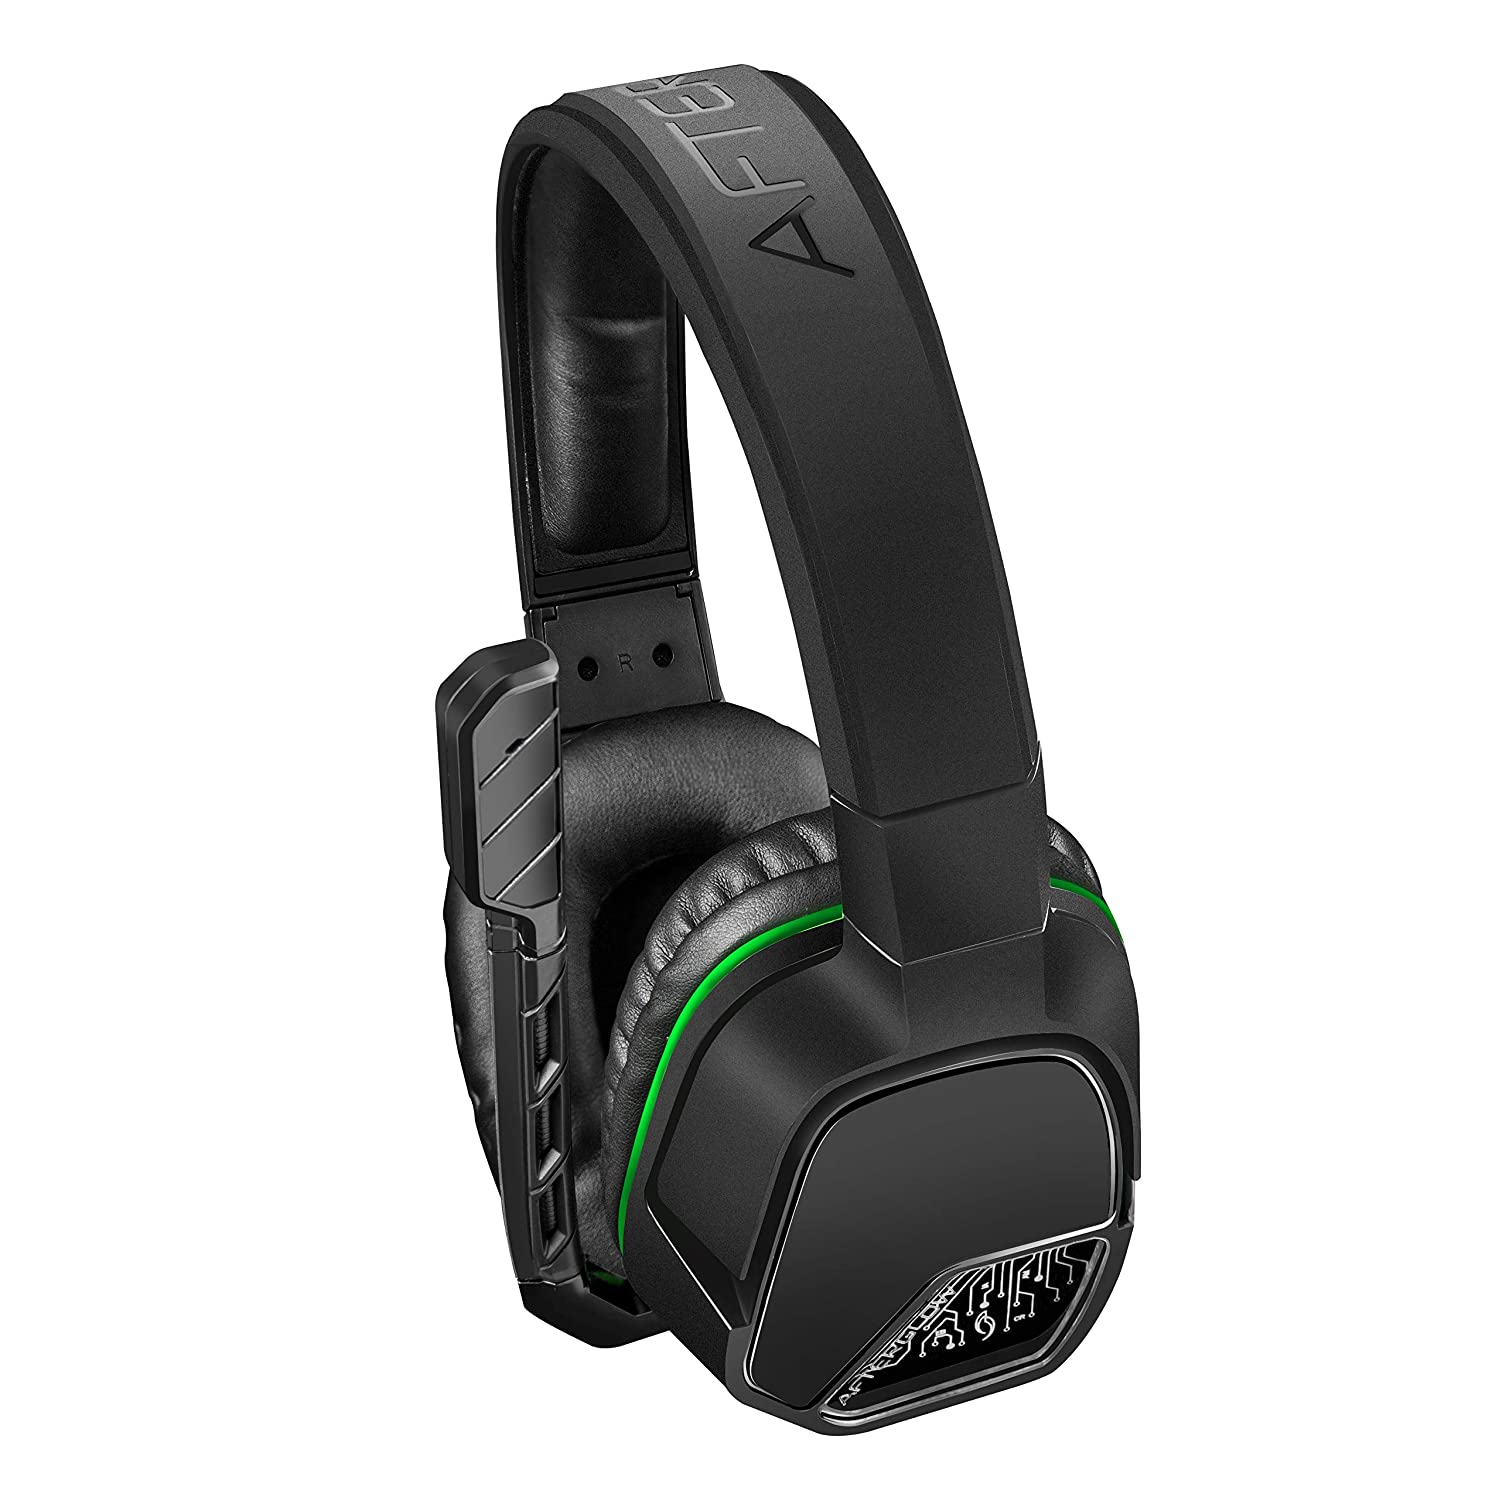 Official Afterglow Lvl 3 Stereo Headset Xbox One